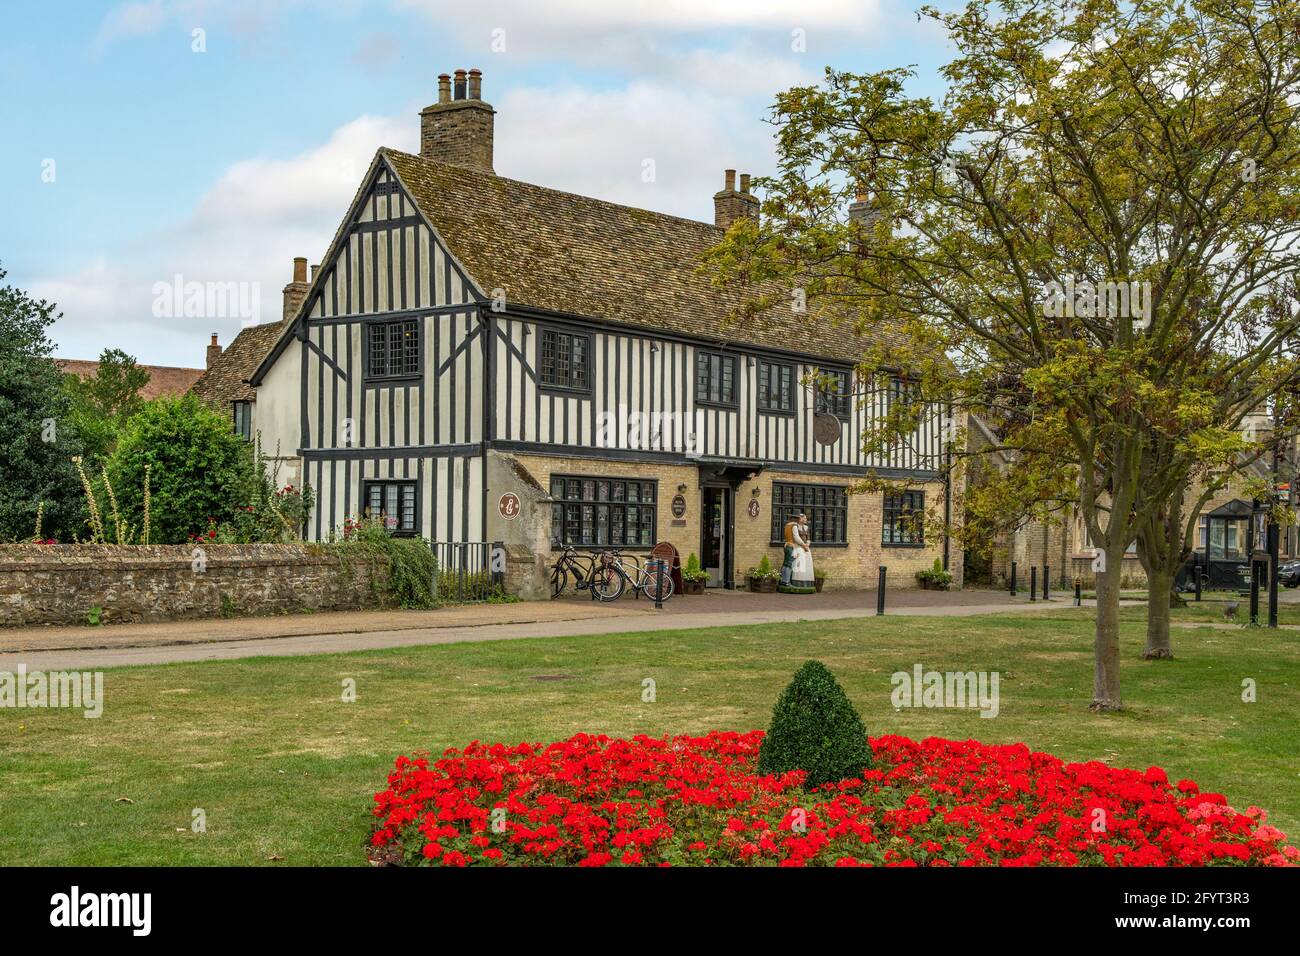 Oliver Cromwell's House, Ely, Cambridgeshire, Angleterre Banque D'Images